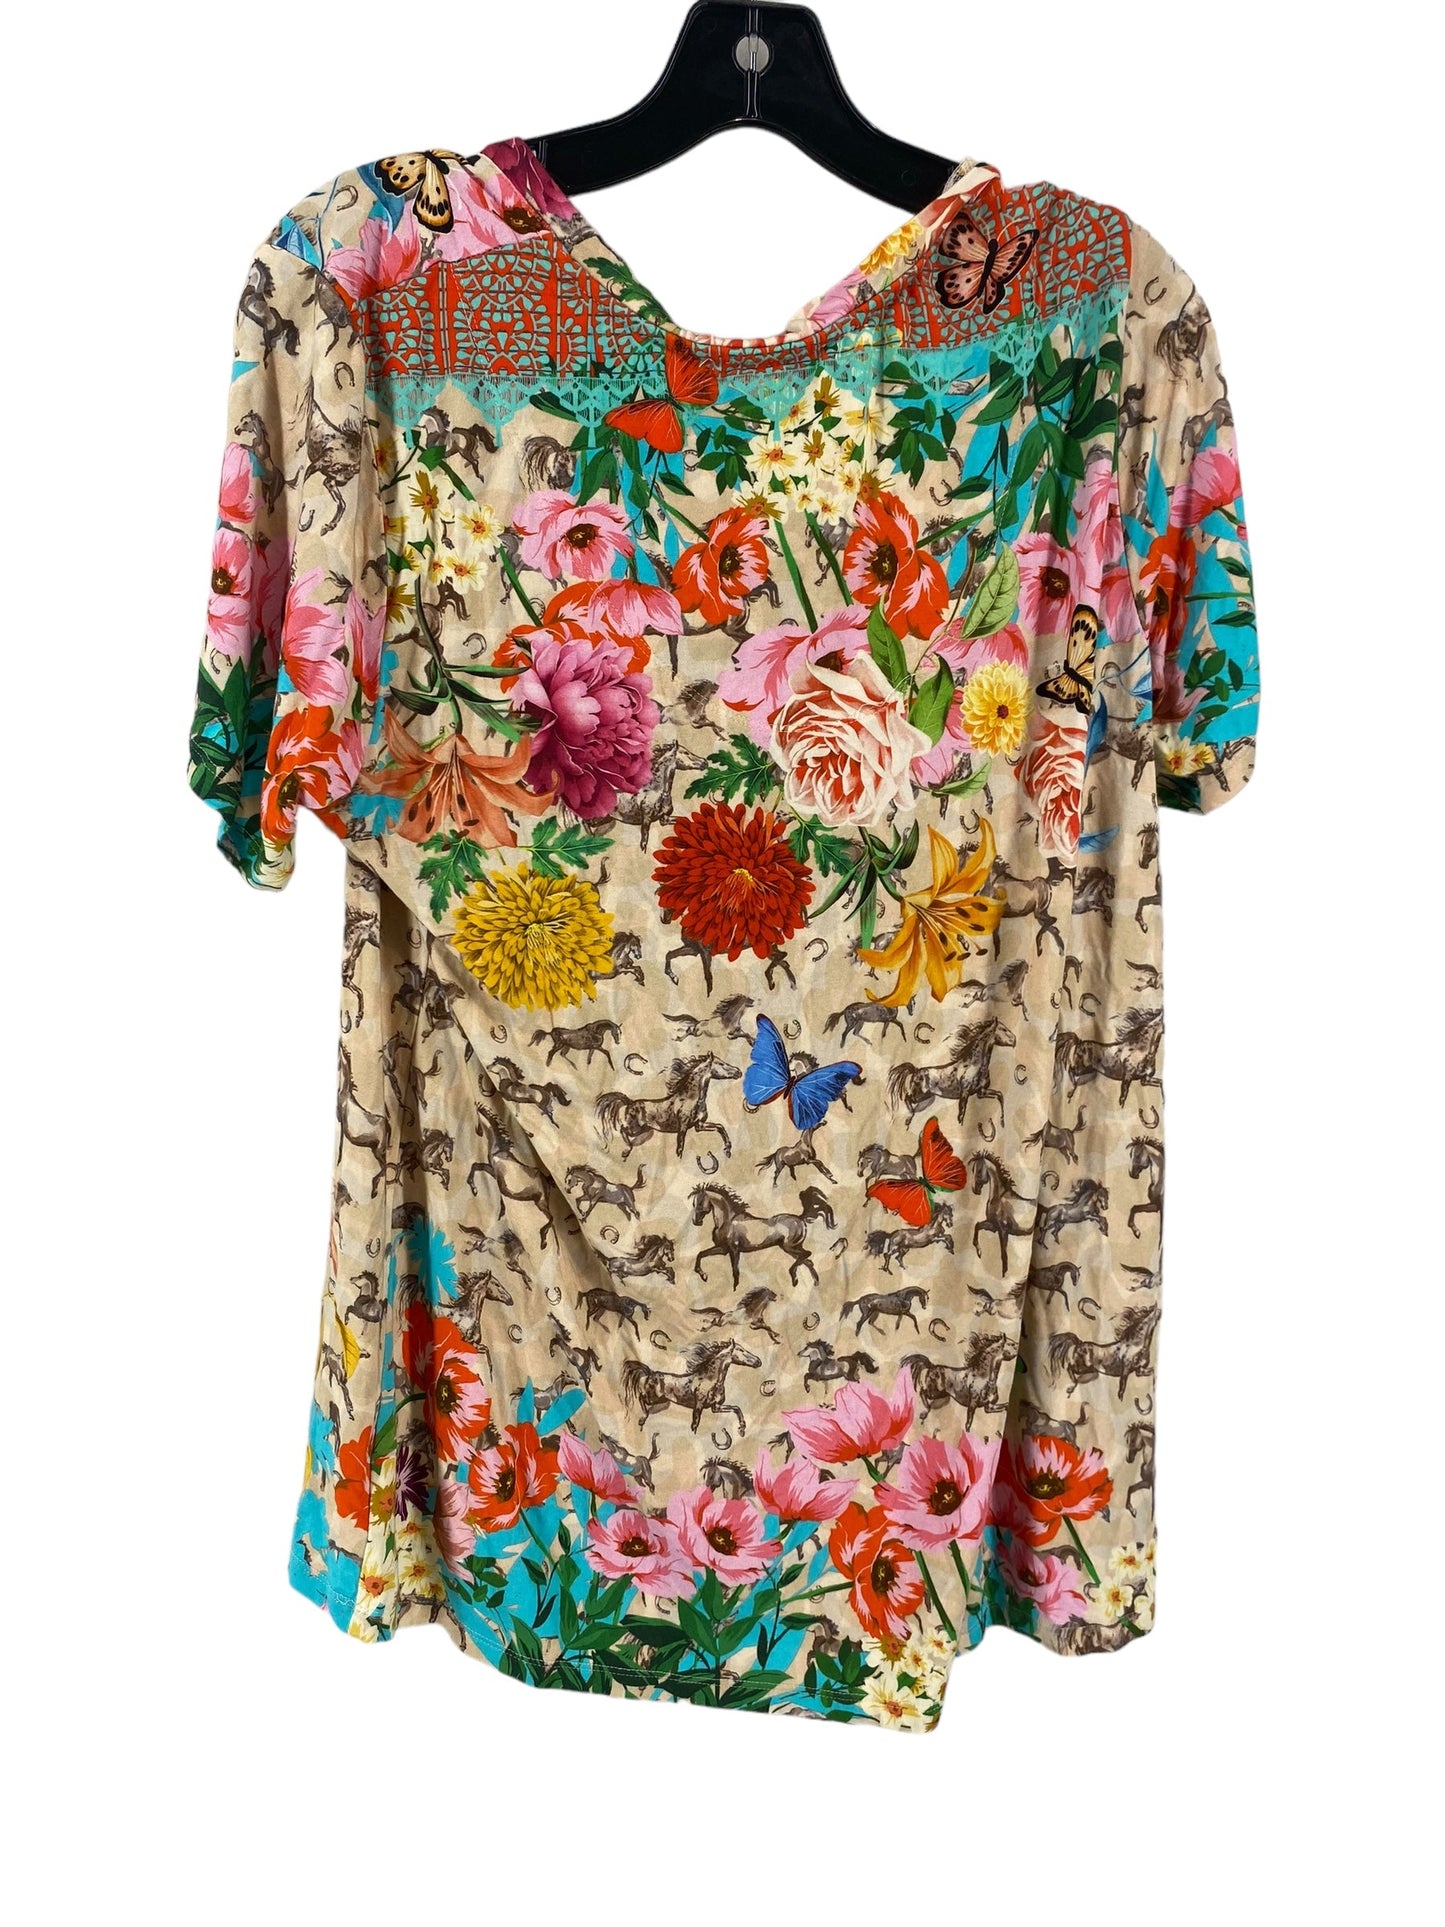 Floral Print Top Short Sleeve Johnny Was, Size L